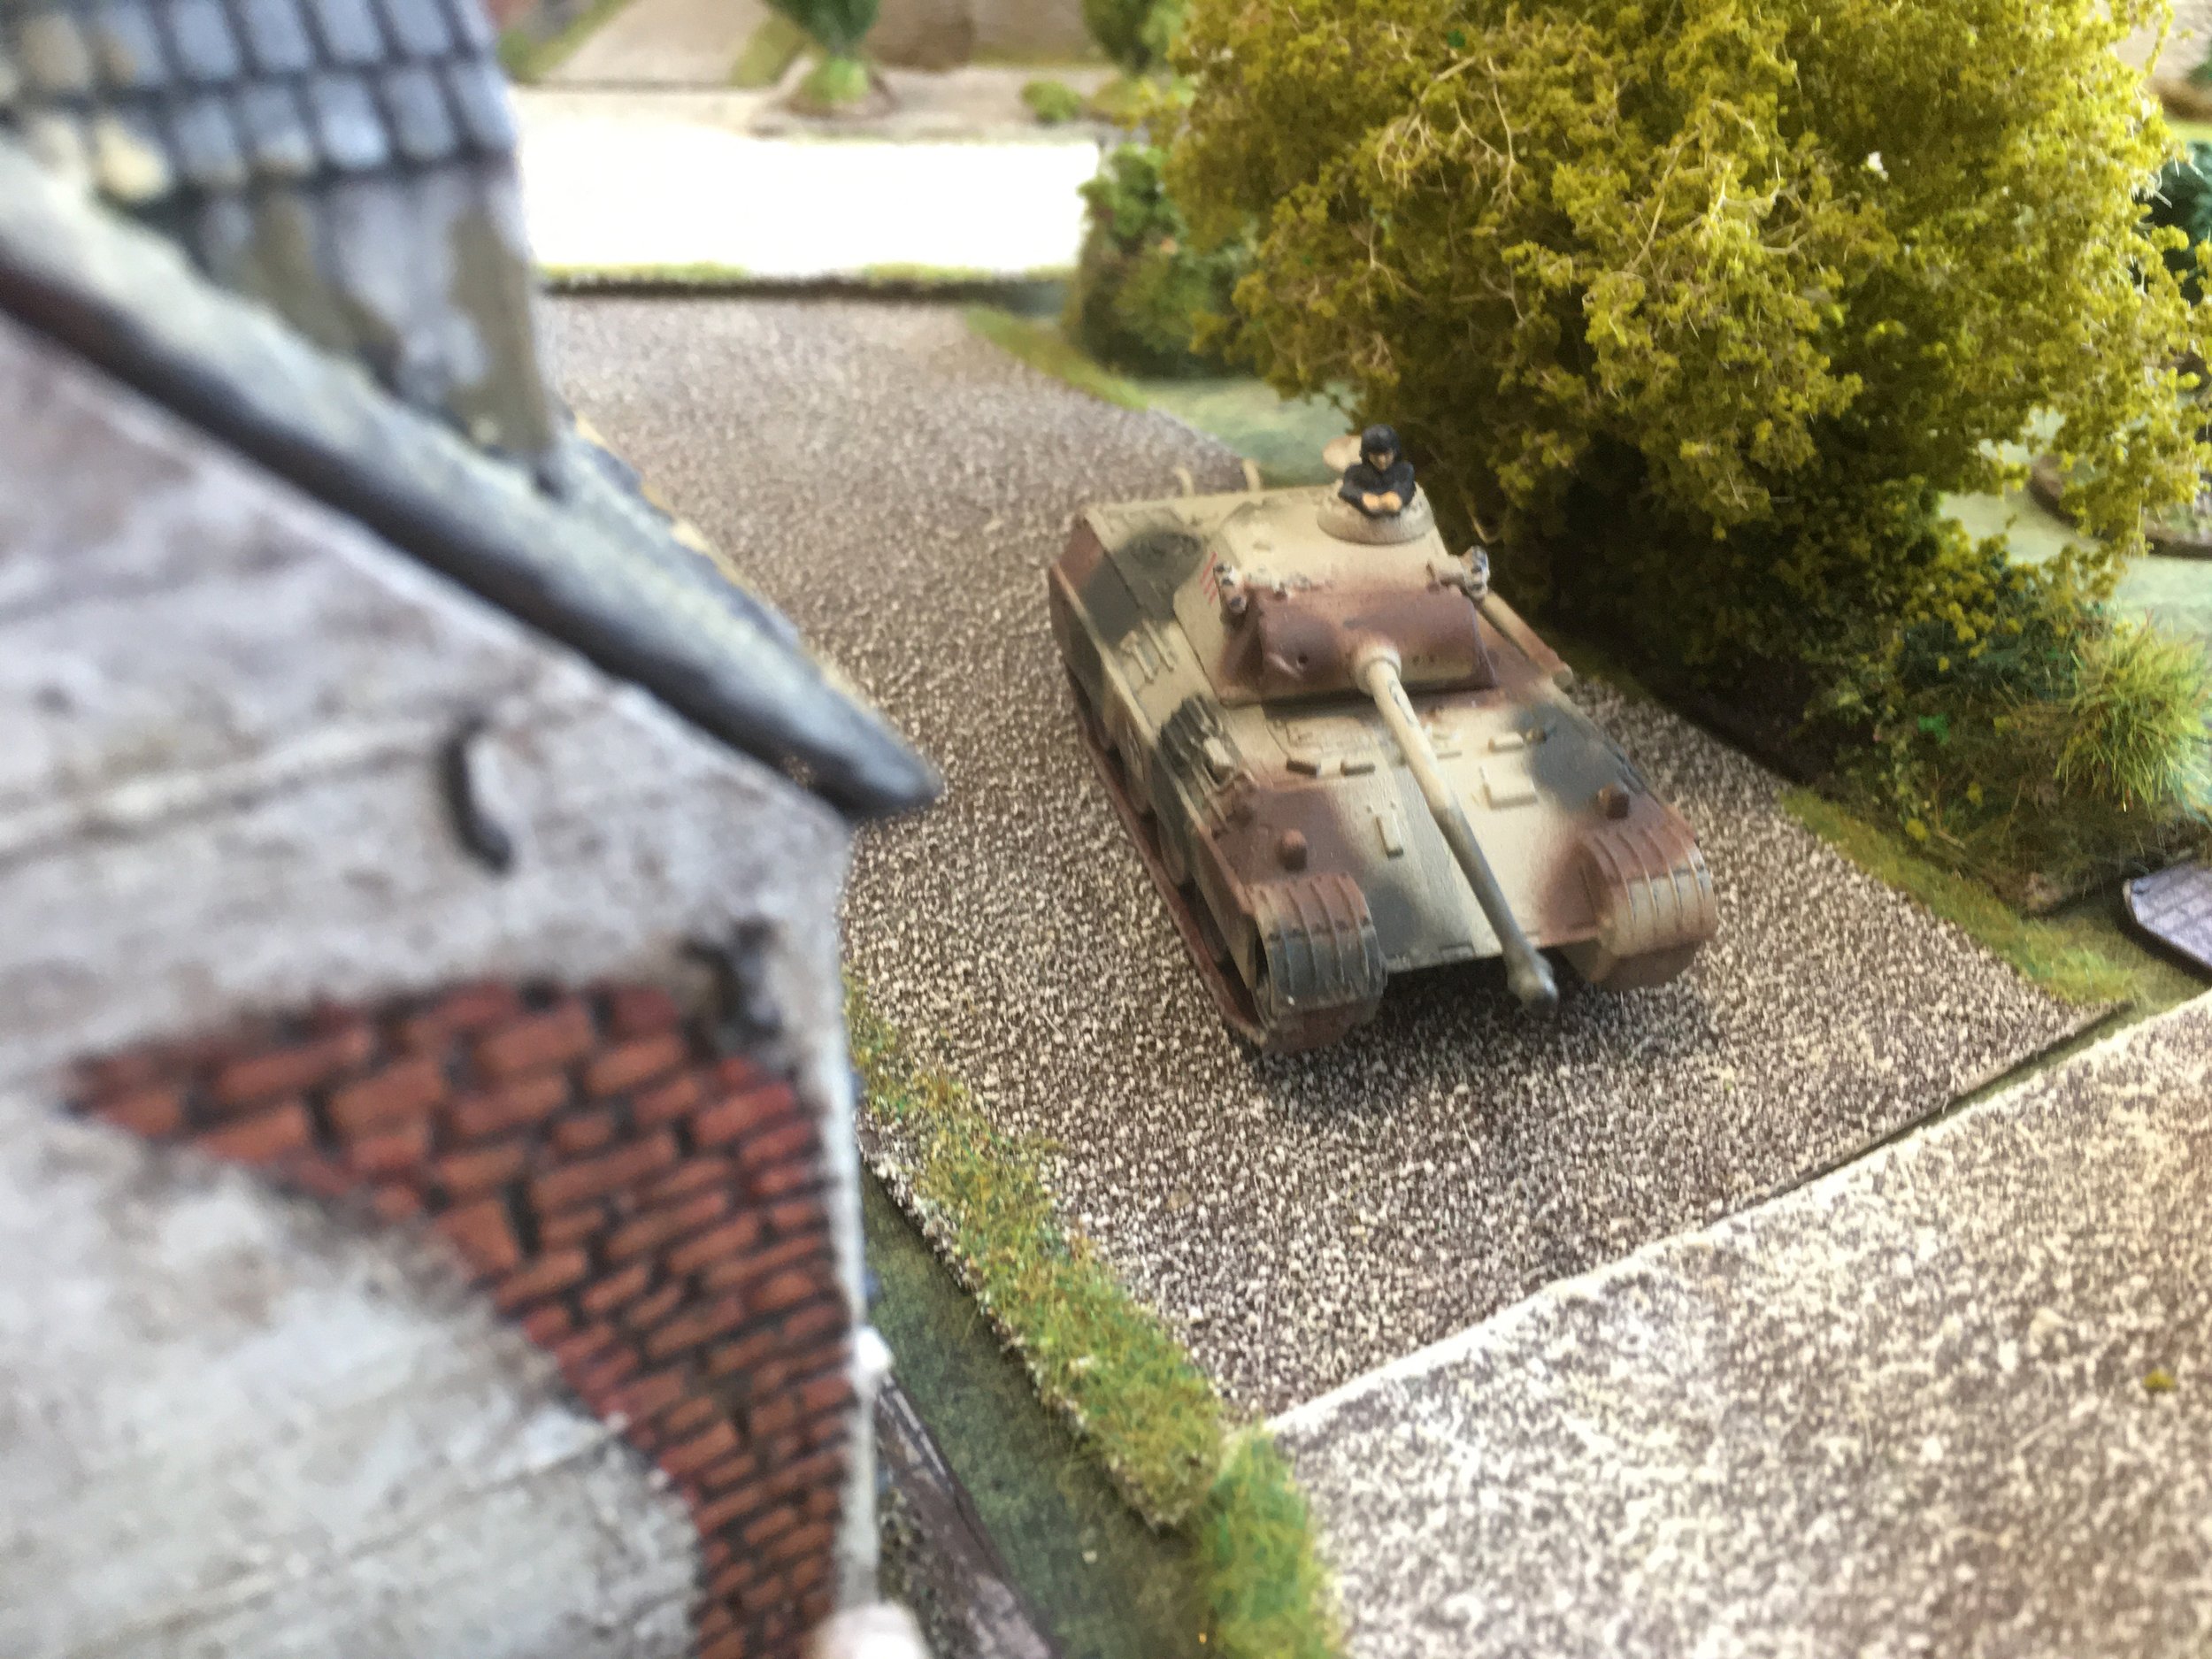 However the bad day for the tanks of the Welsh Guards was not over as the Panther spotted a target heading towards the bridge...